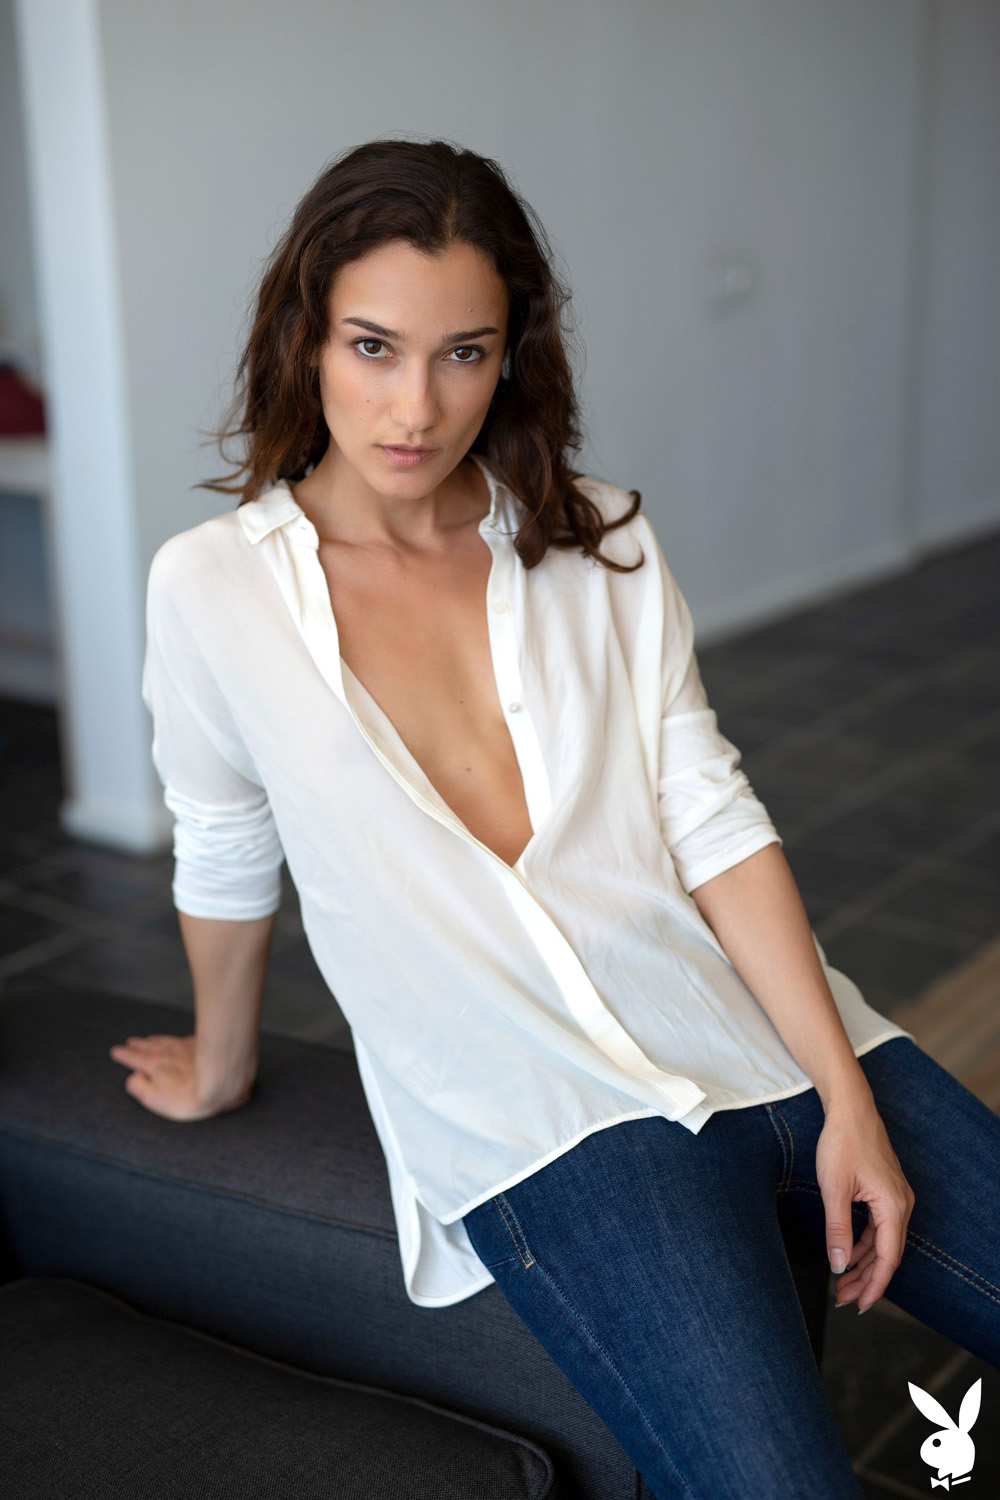 Sofi Ka slipping out of her casual jeans and white blouse